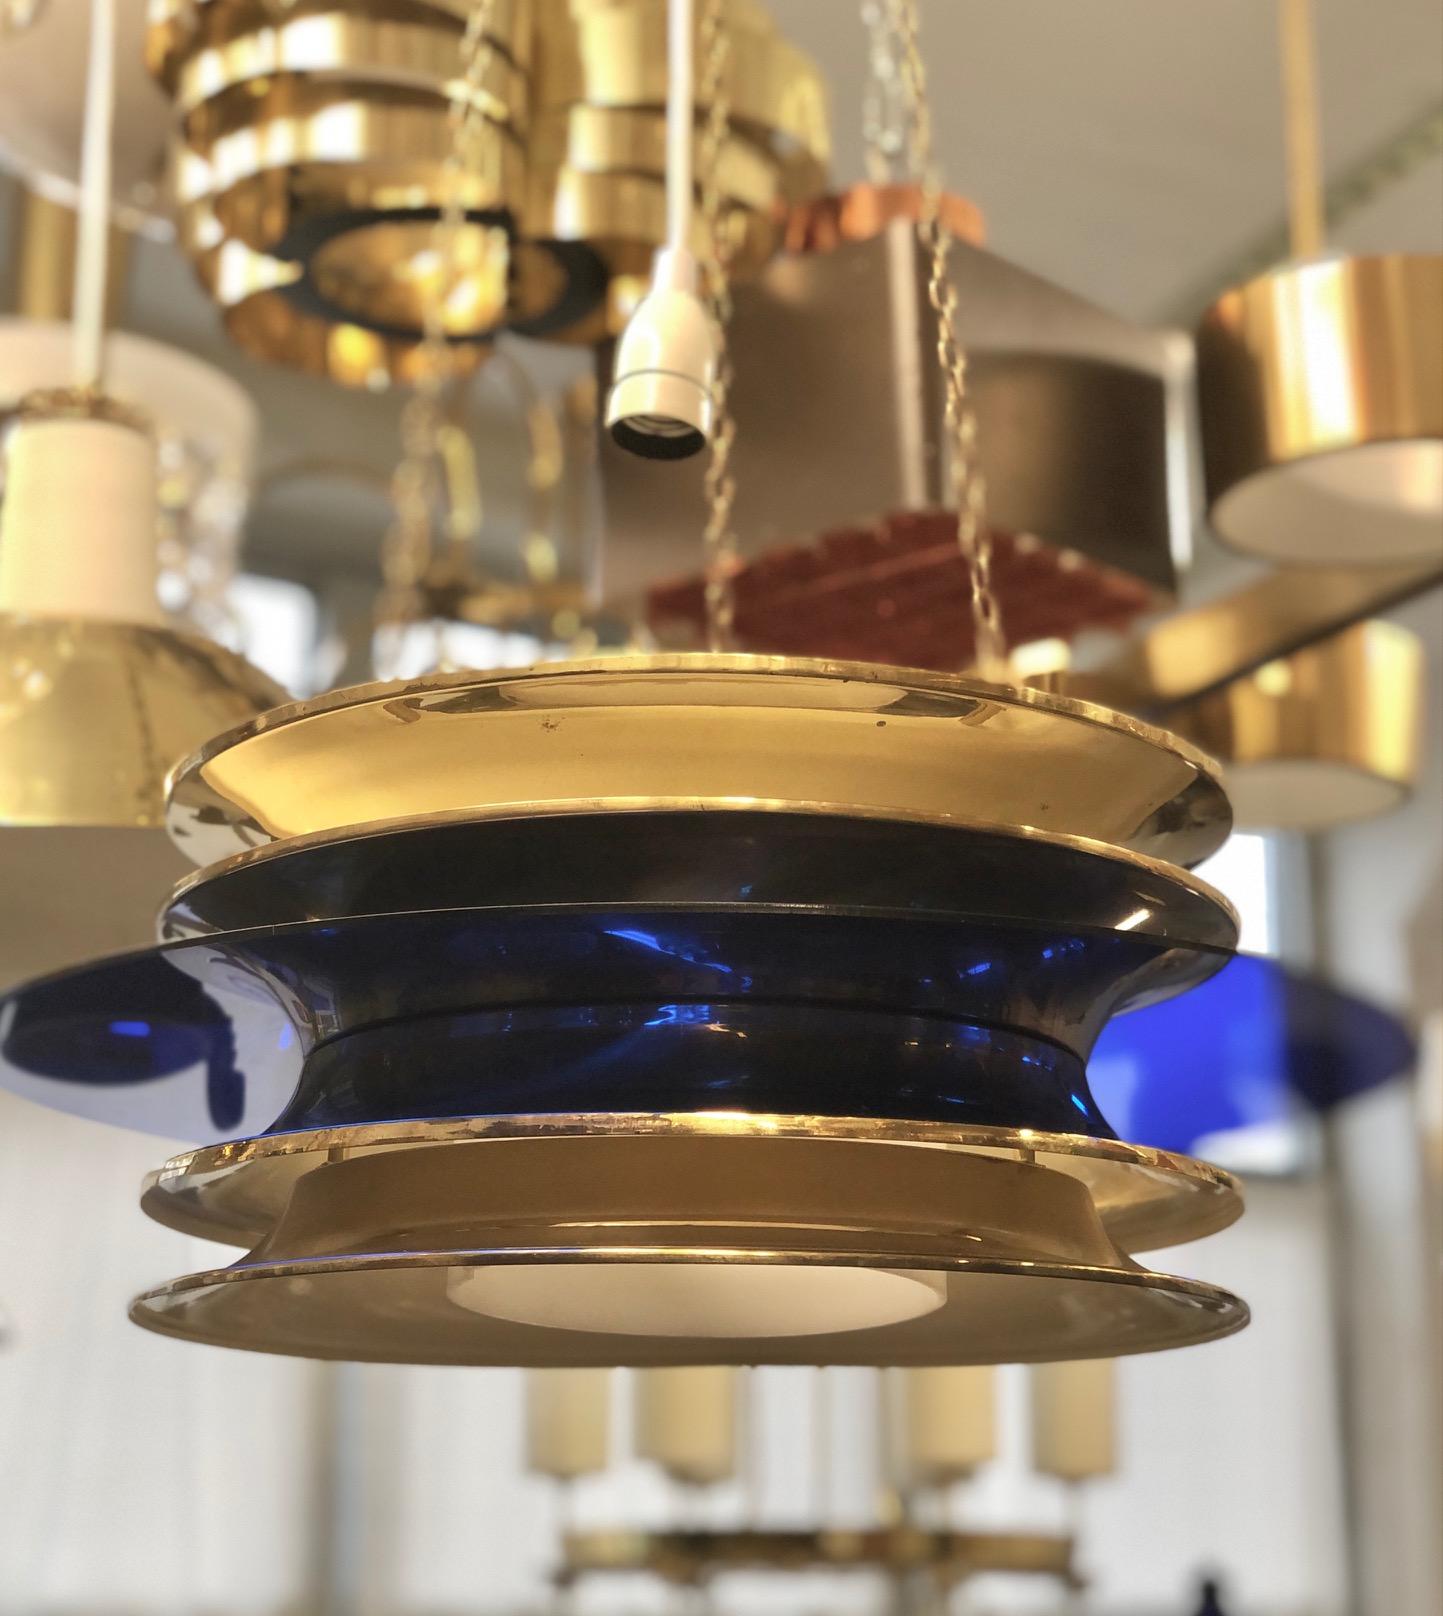 A pair of vintage pendants designed by Kai Ruokonen for Lynx, Finland, circa 1952.
Polished brass, blue acrylic disc and opaline acrylic diffuser.
Rewiring available upon request. Drop can be adjusted.
Can be sold separately, price is for each item.